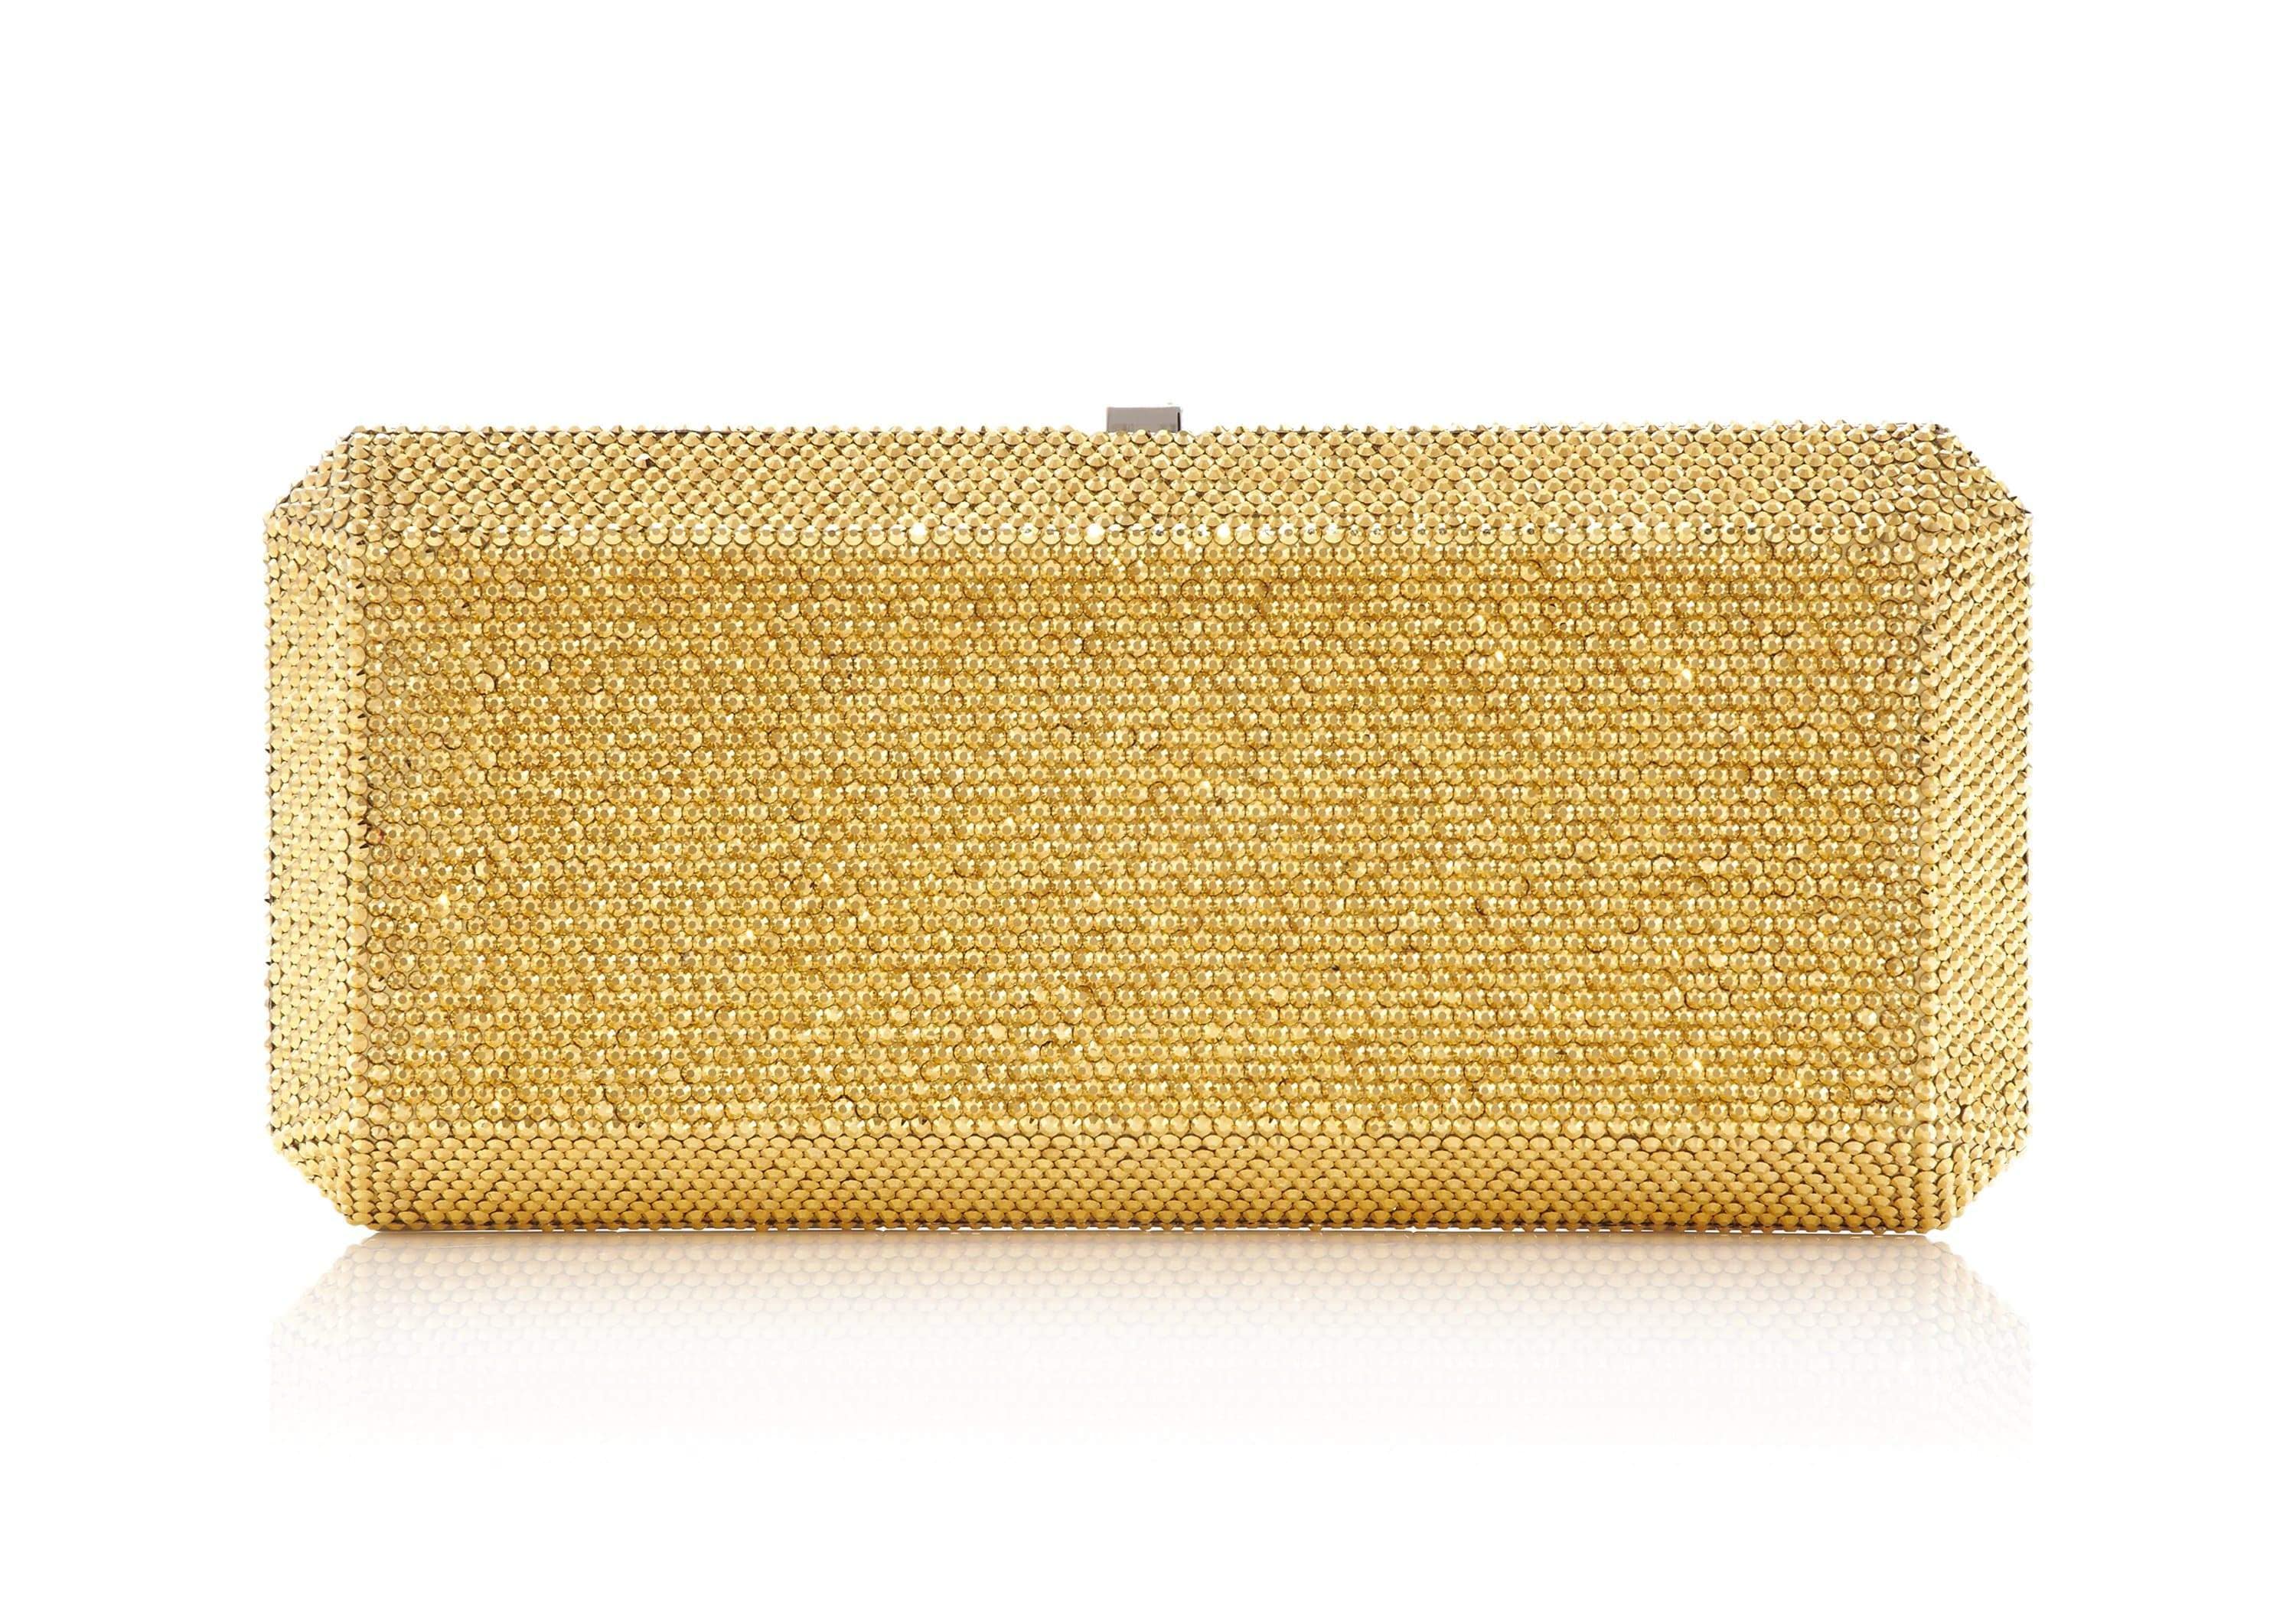 Gold Bags: The Accessory Helping Us Master The Metallic Y2K Trend